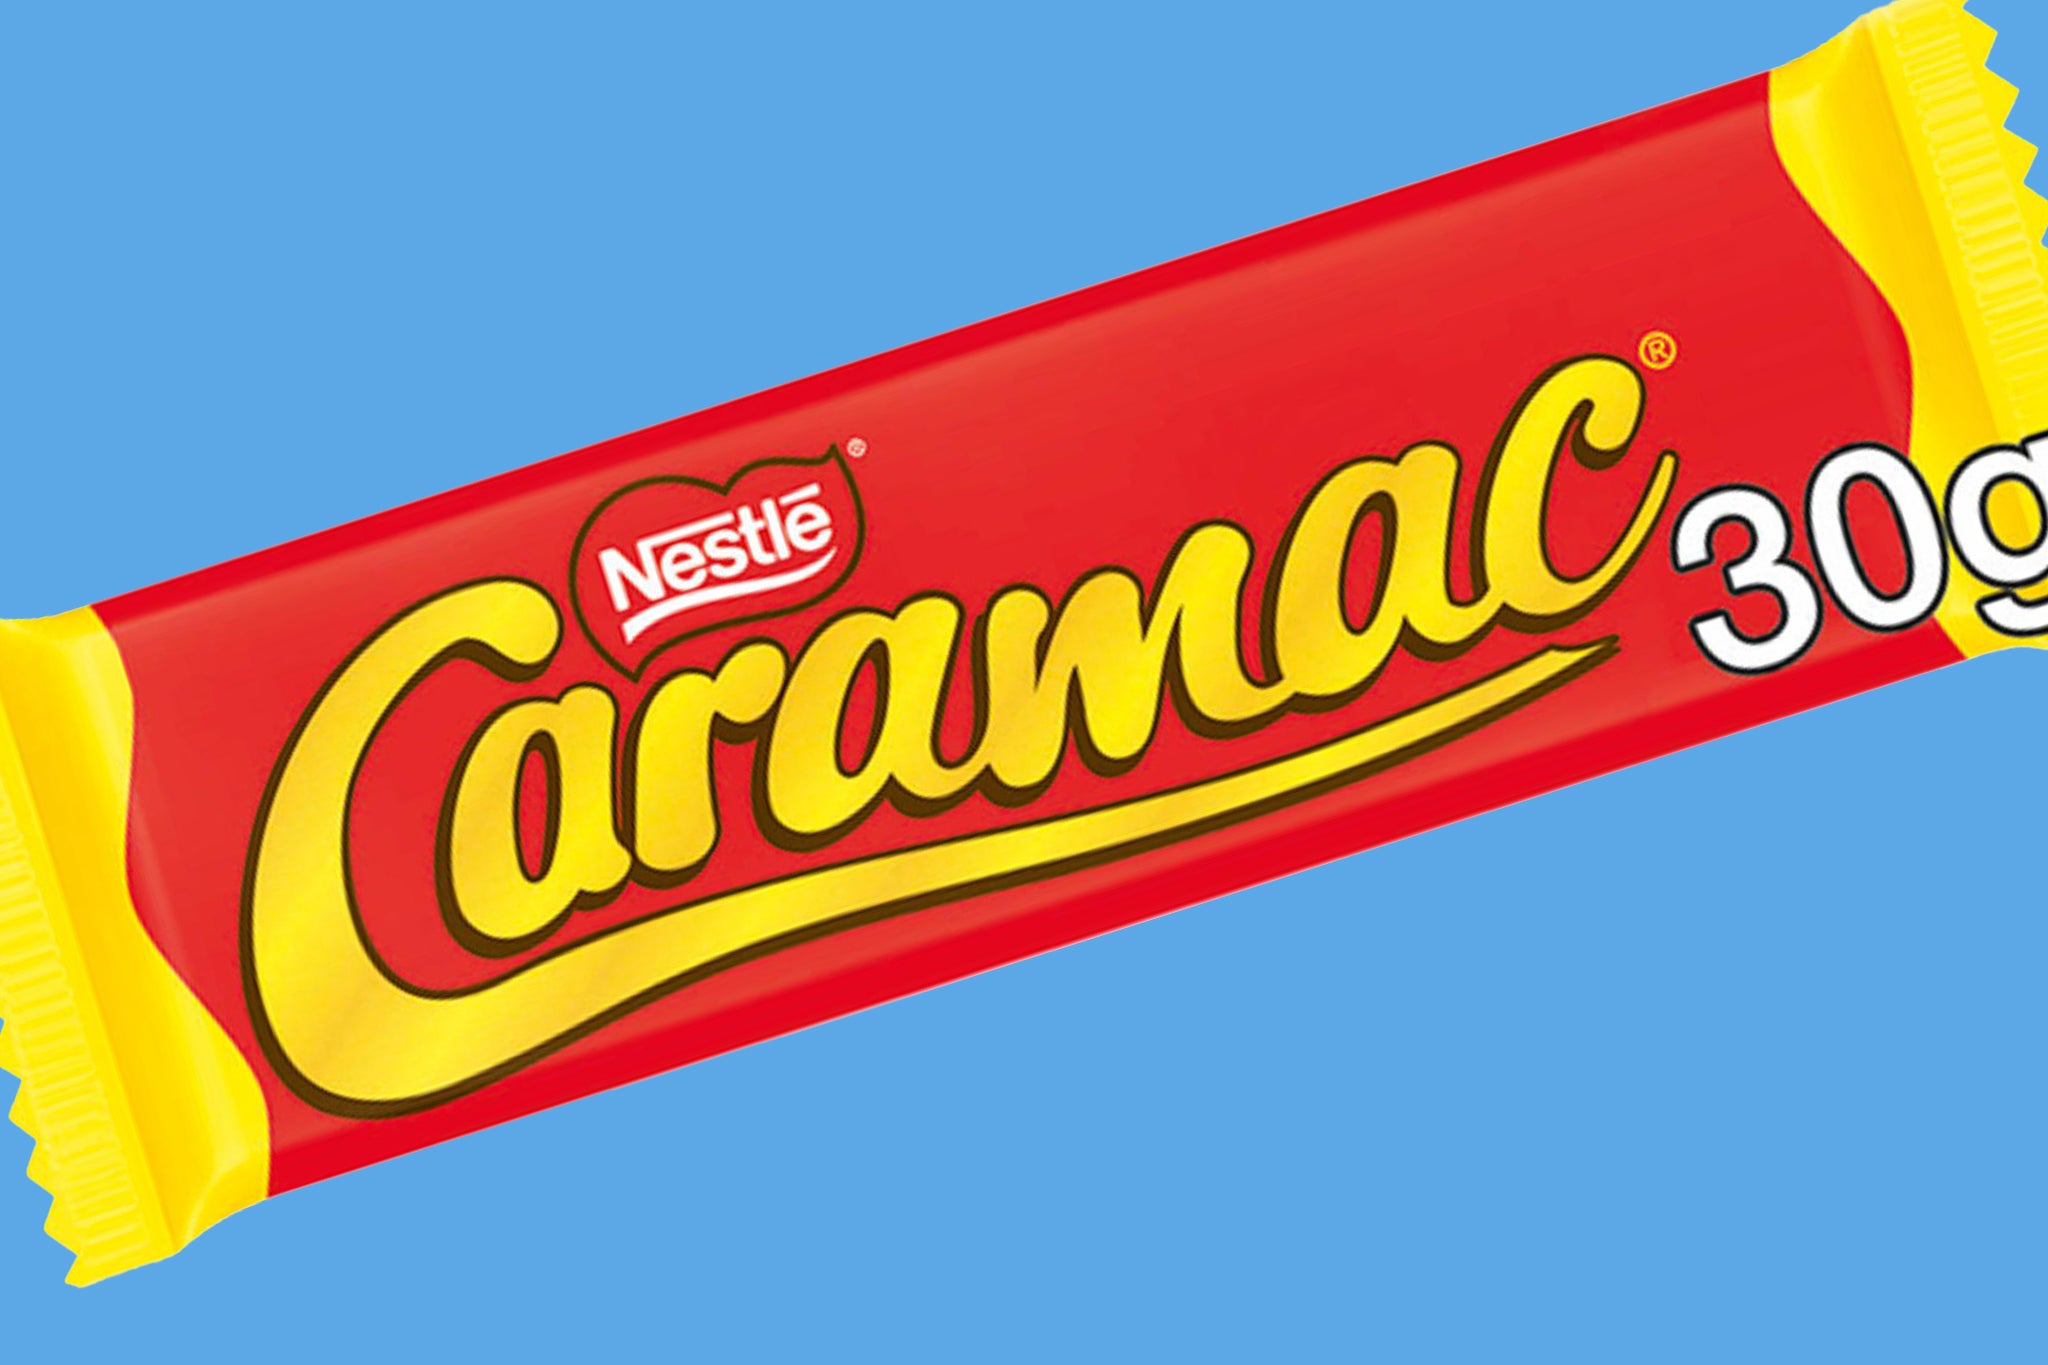 nestlé, supermarkets, independent debate, what retro chocolate bar would you bring back now caramac is gone for good? join the independent debate